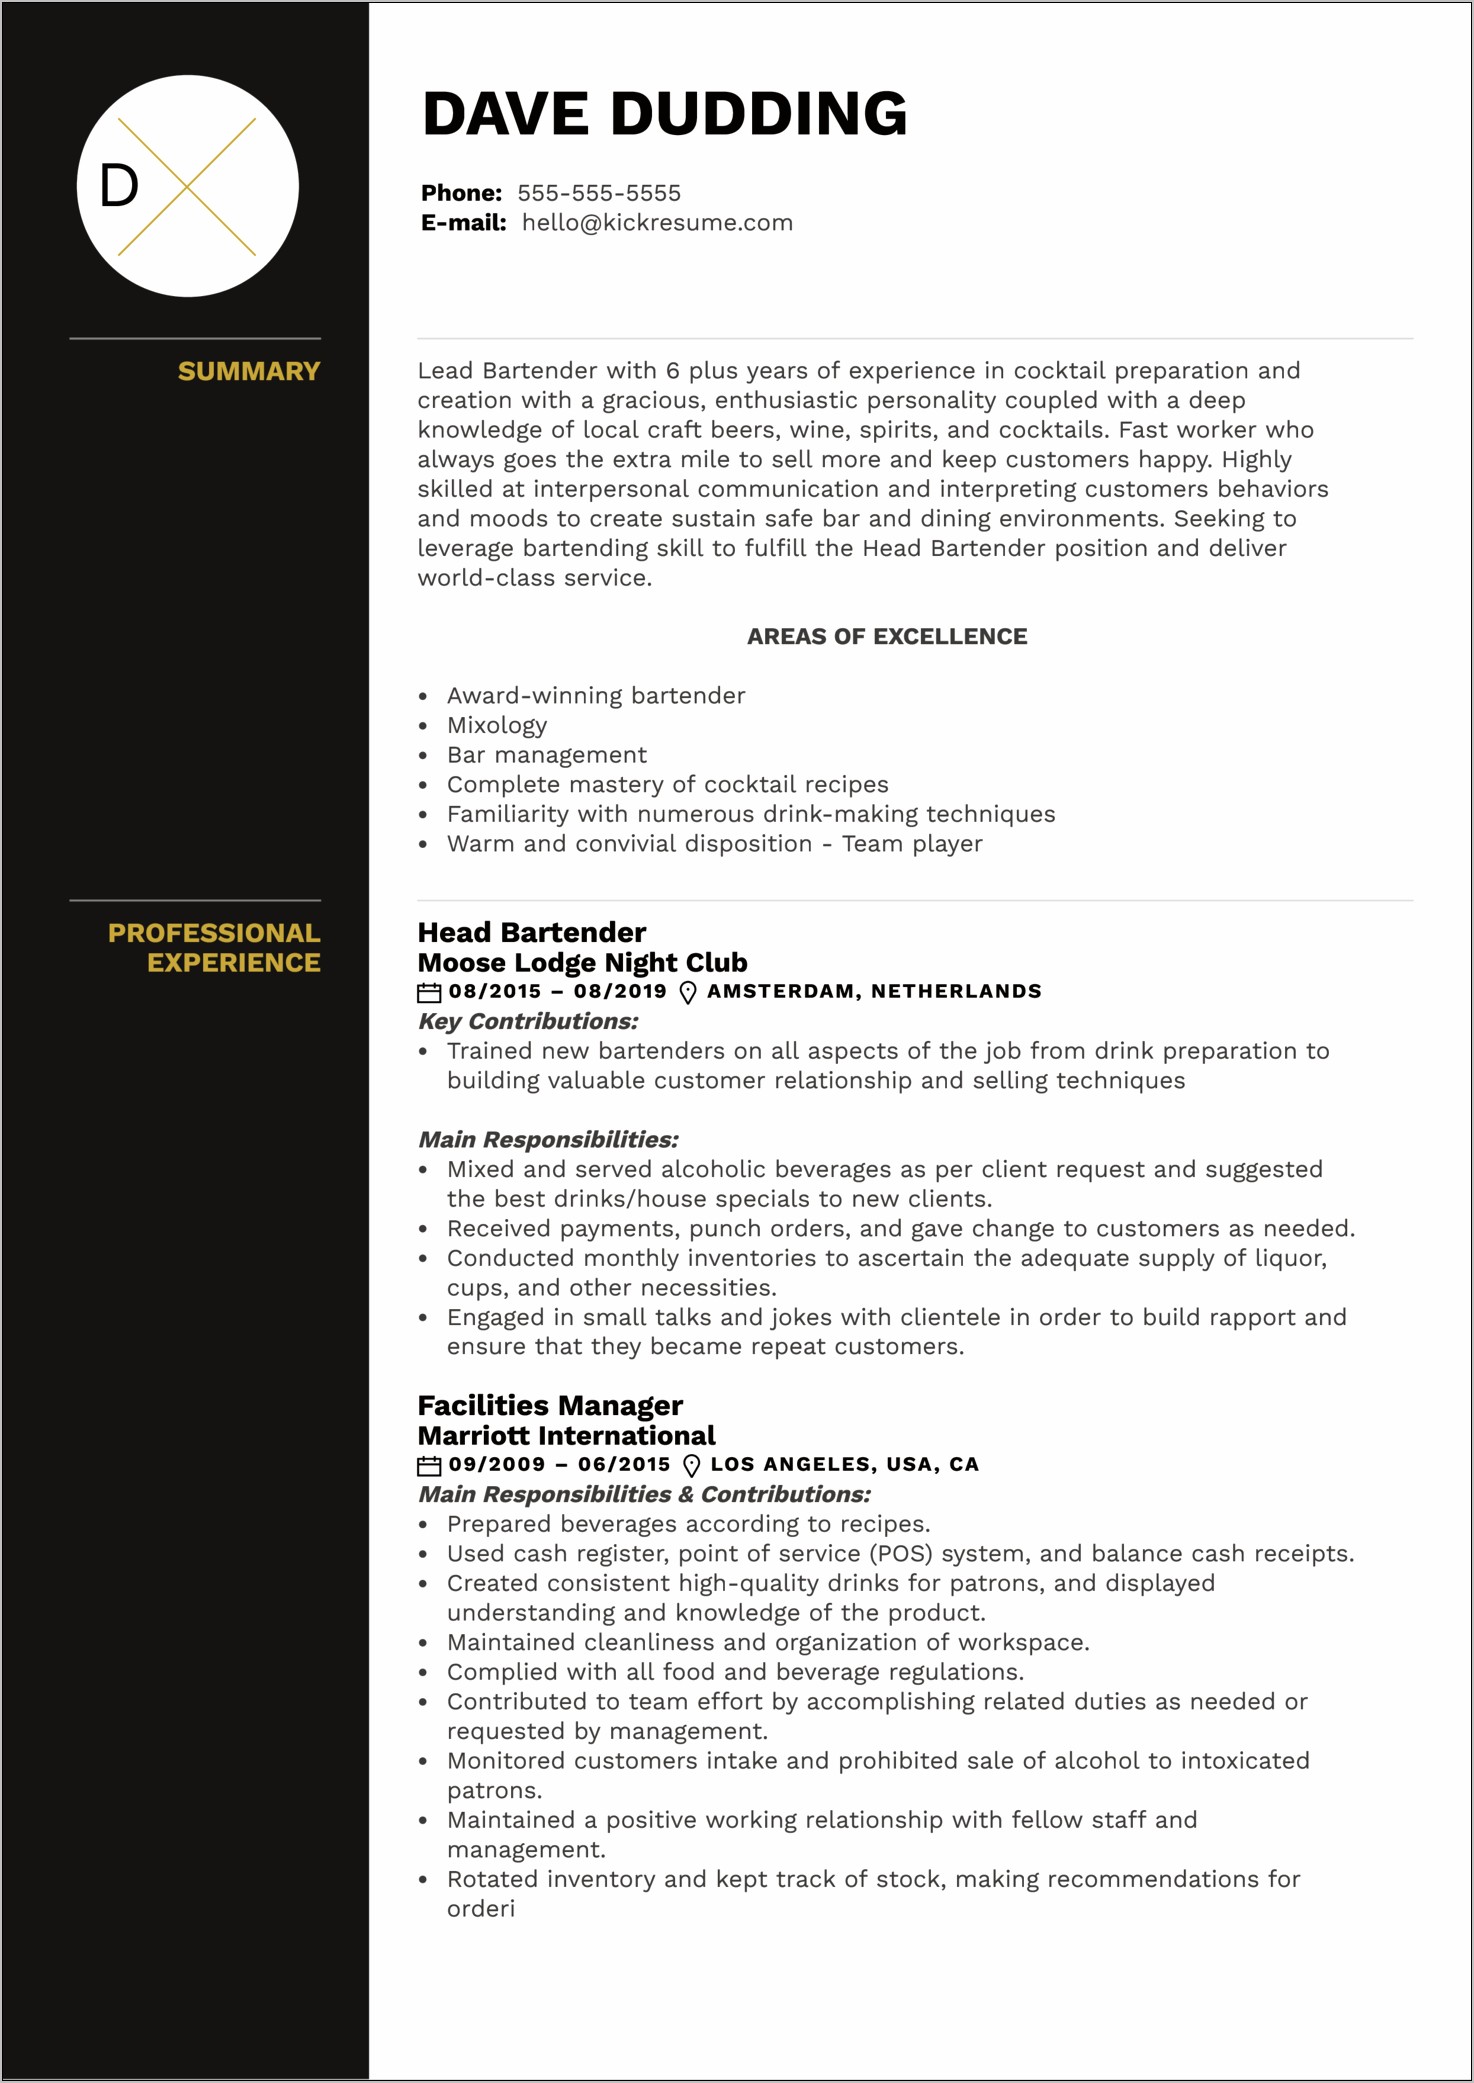 Is A Summary Needed On A Resume